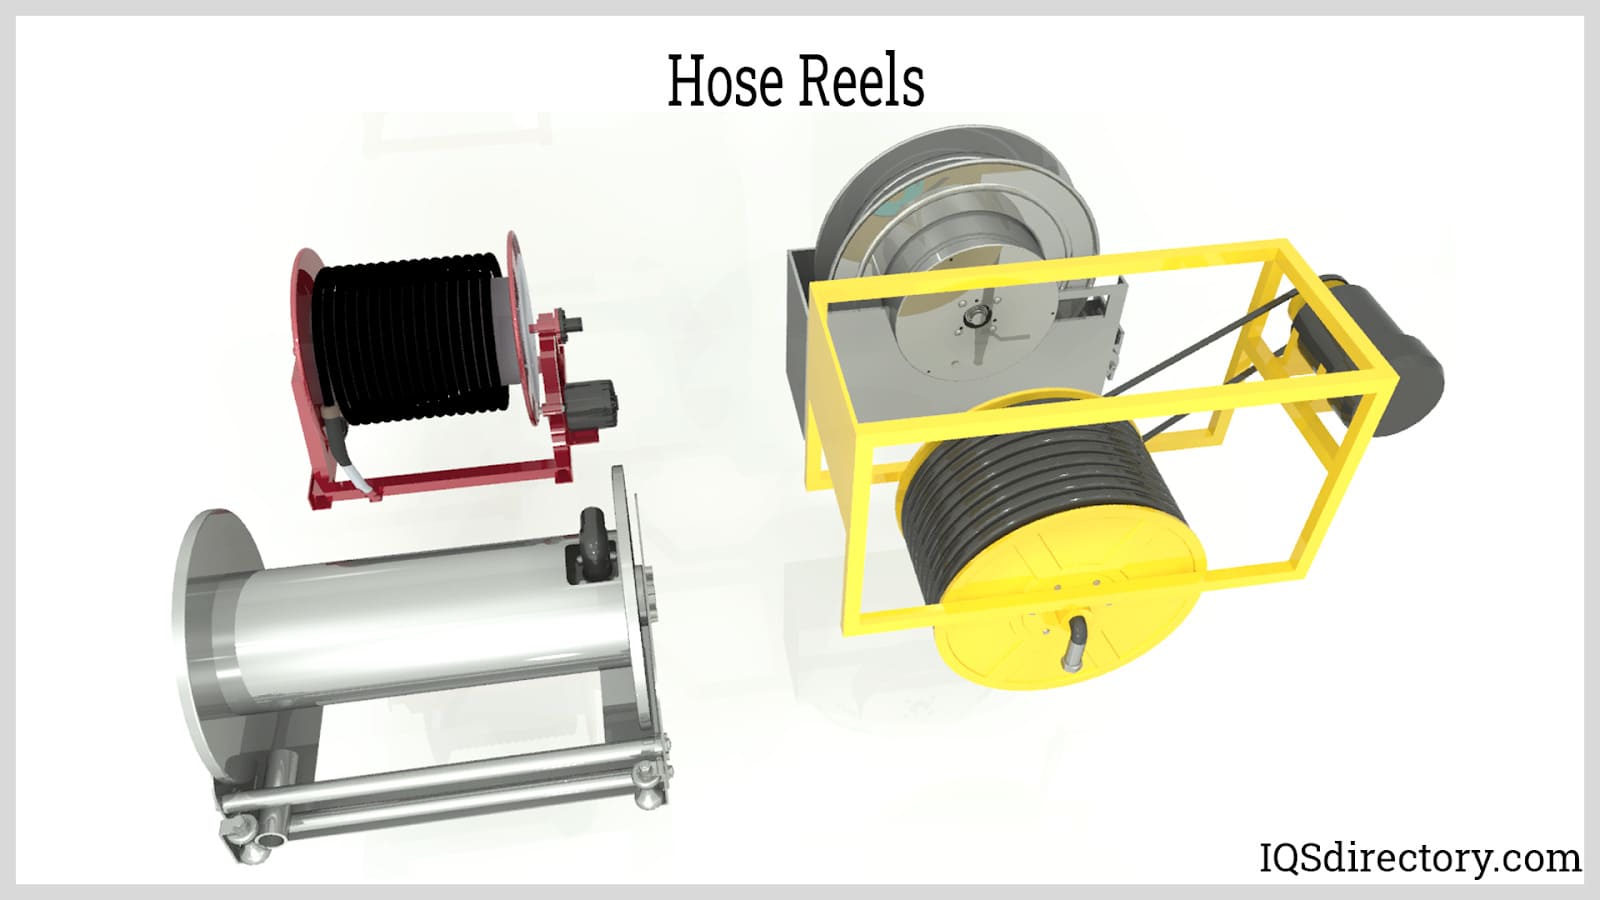 e-spool flex cable reel for continuous panel feed in industrial robots